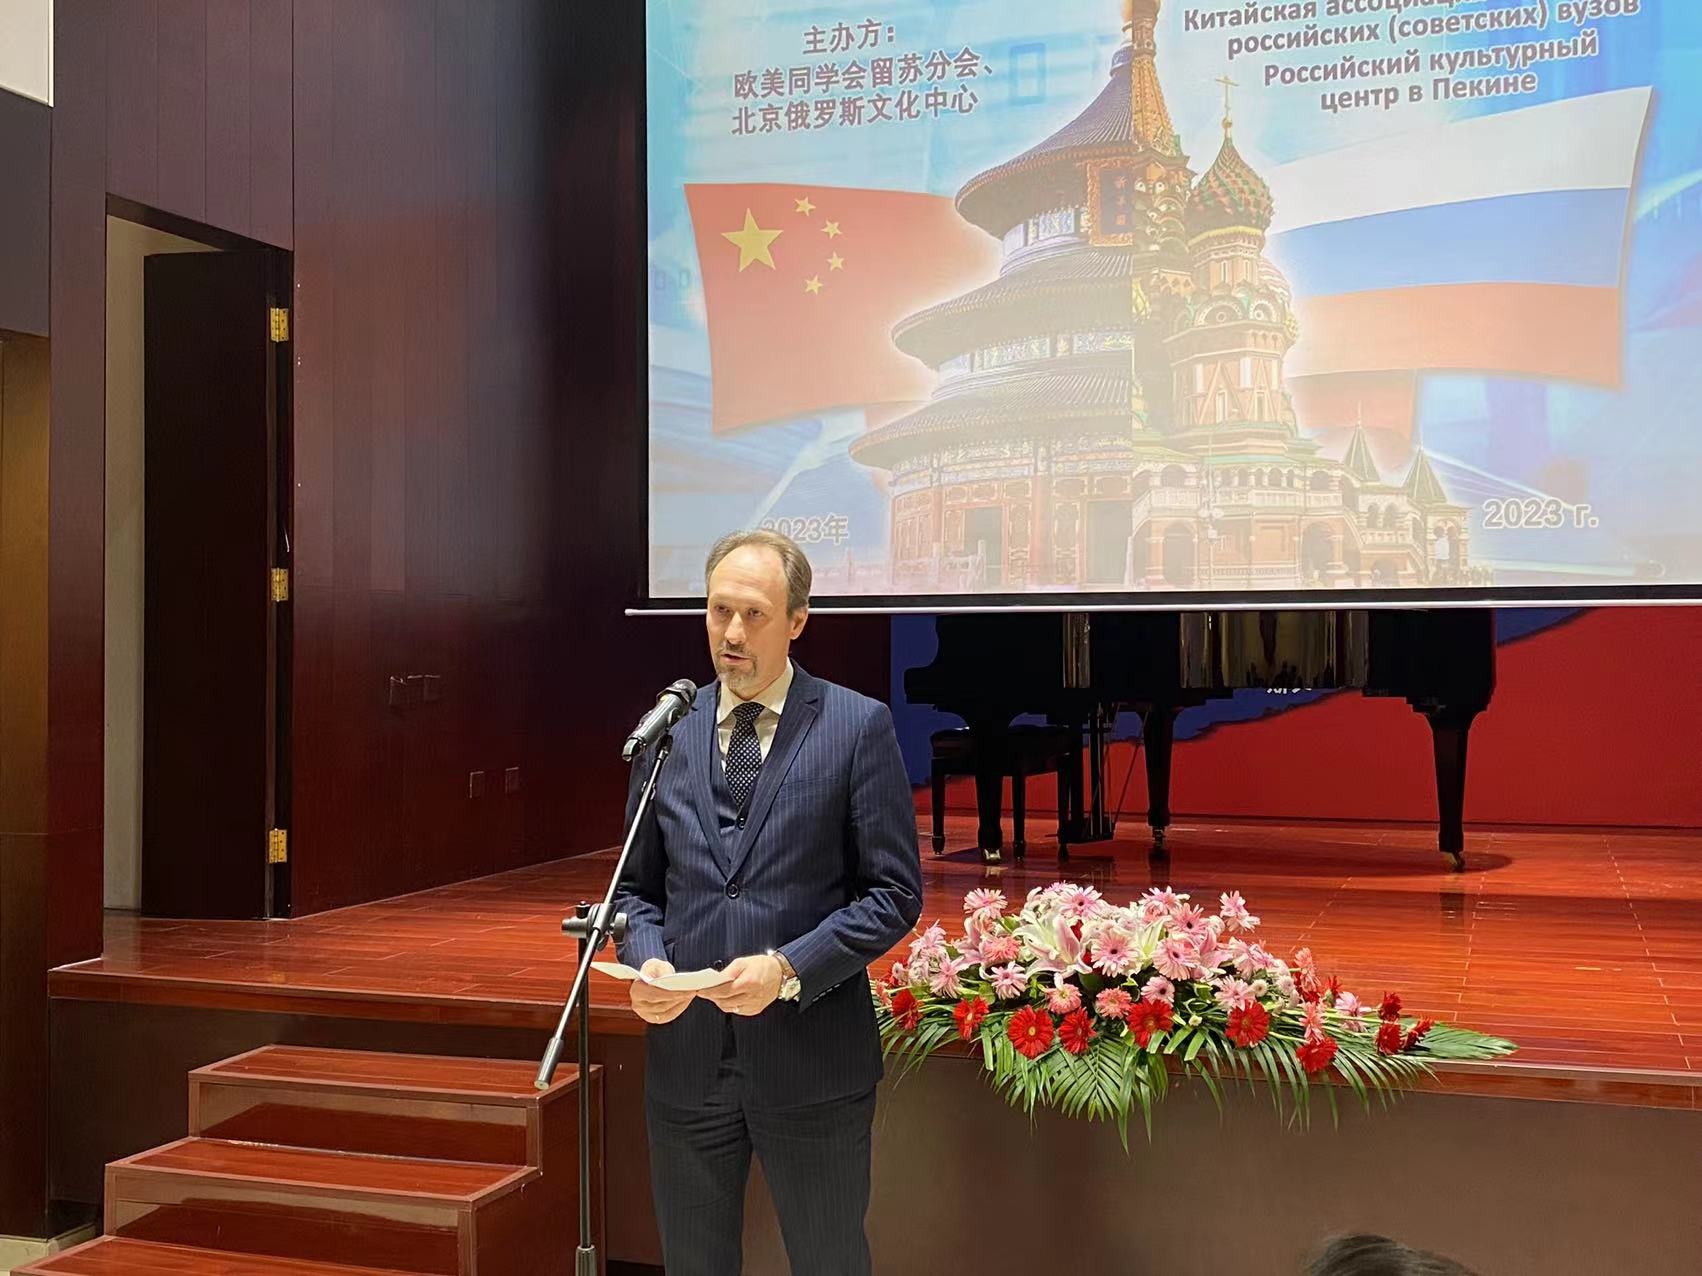 Zhelokhovtsev Ivan, Minister-Counsellor, Deputy Head of Mission of the Russian Embassy in China delivers a speech at the event. Photo: Courtesy of the Russian Cultural Center in Beijing